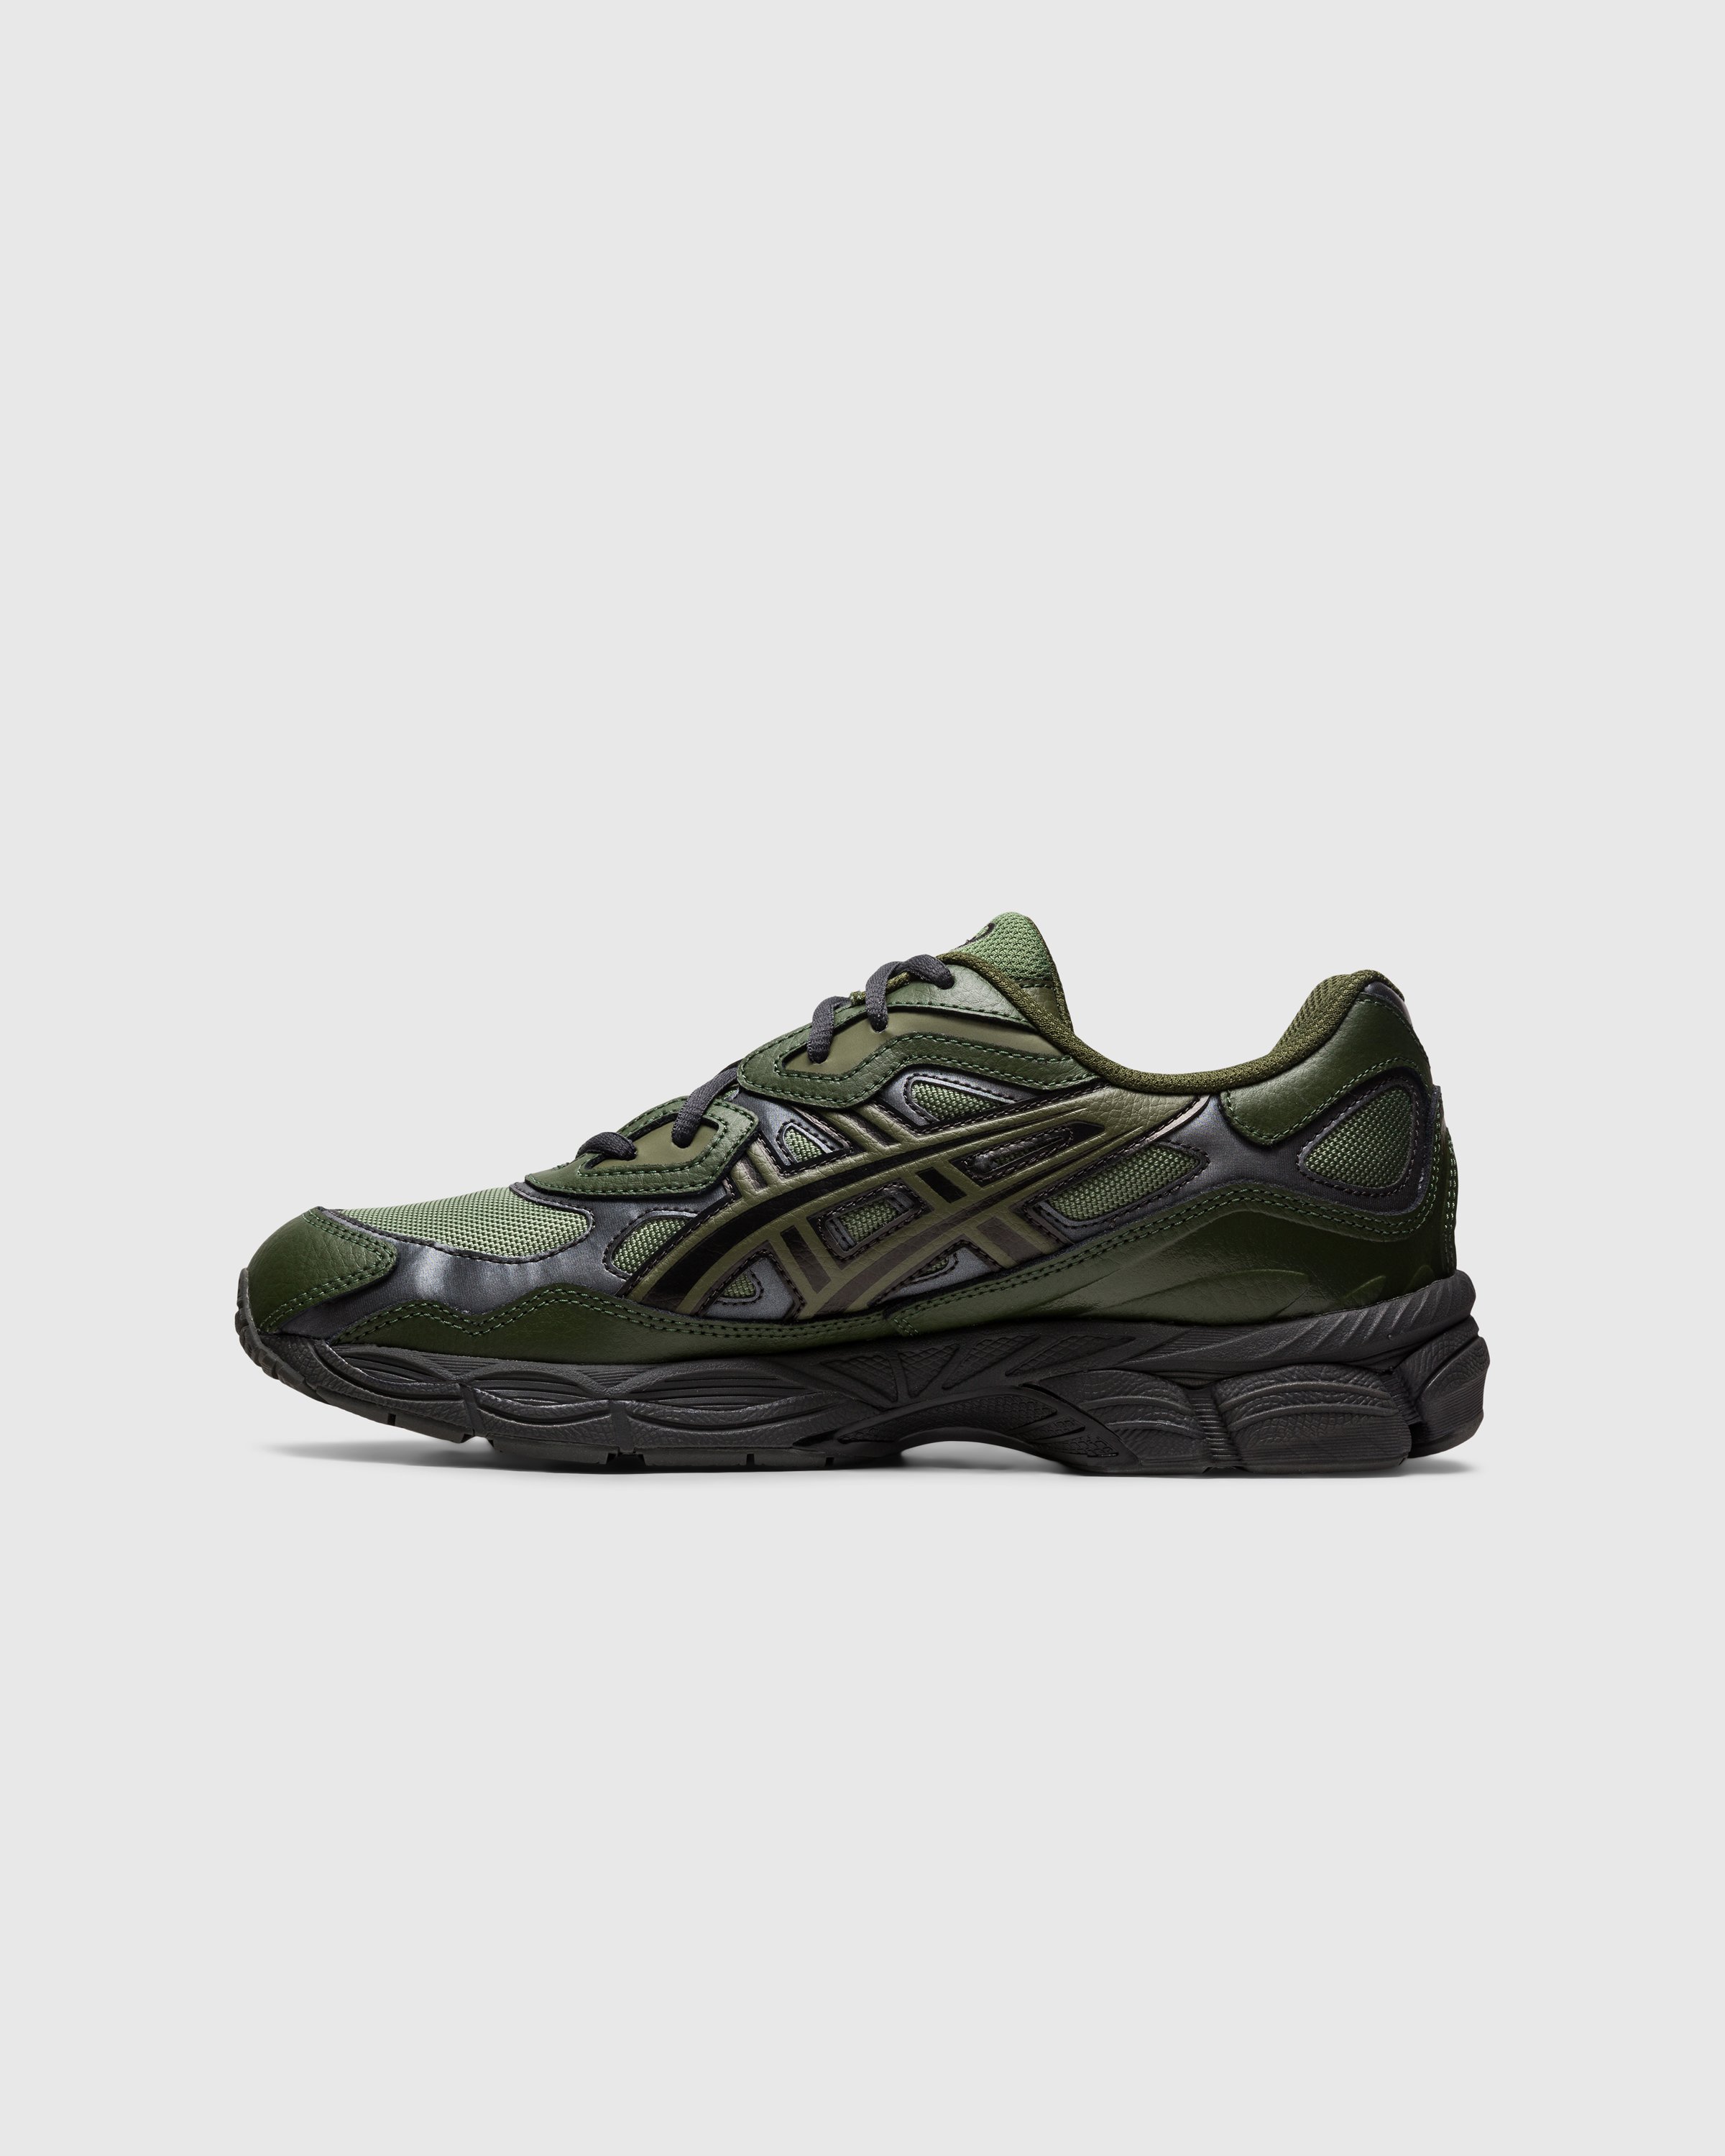 asics - GEL-NYC Moss/Forest - Footwear - Green - Image 2